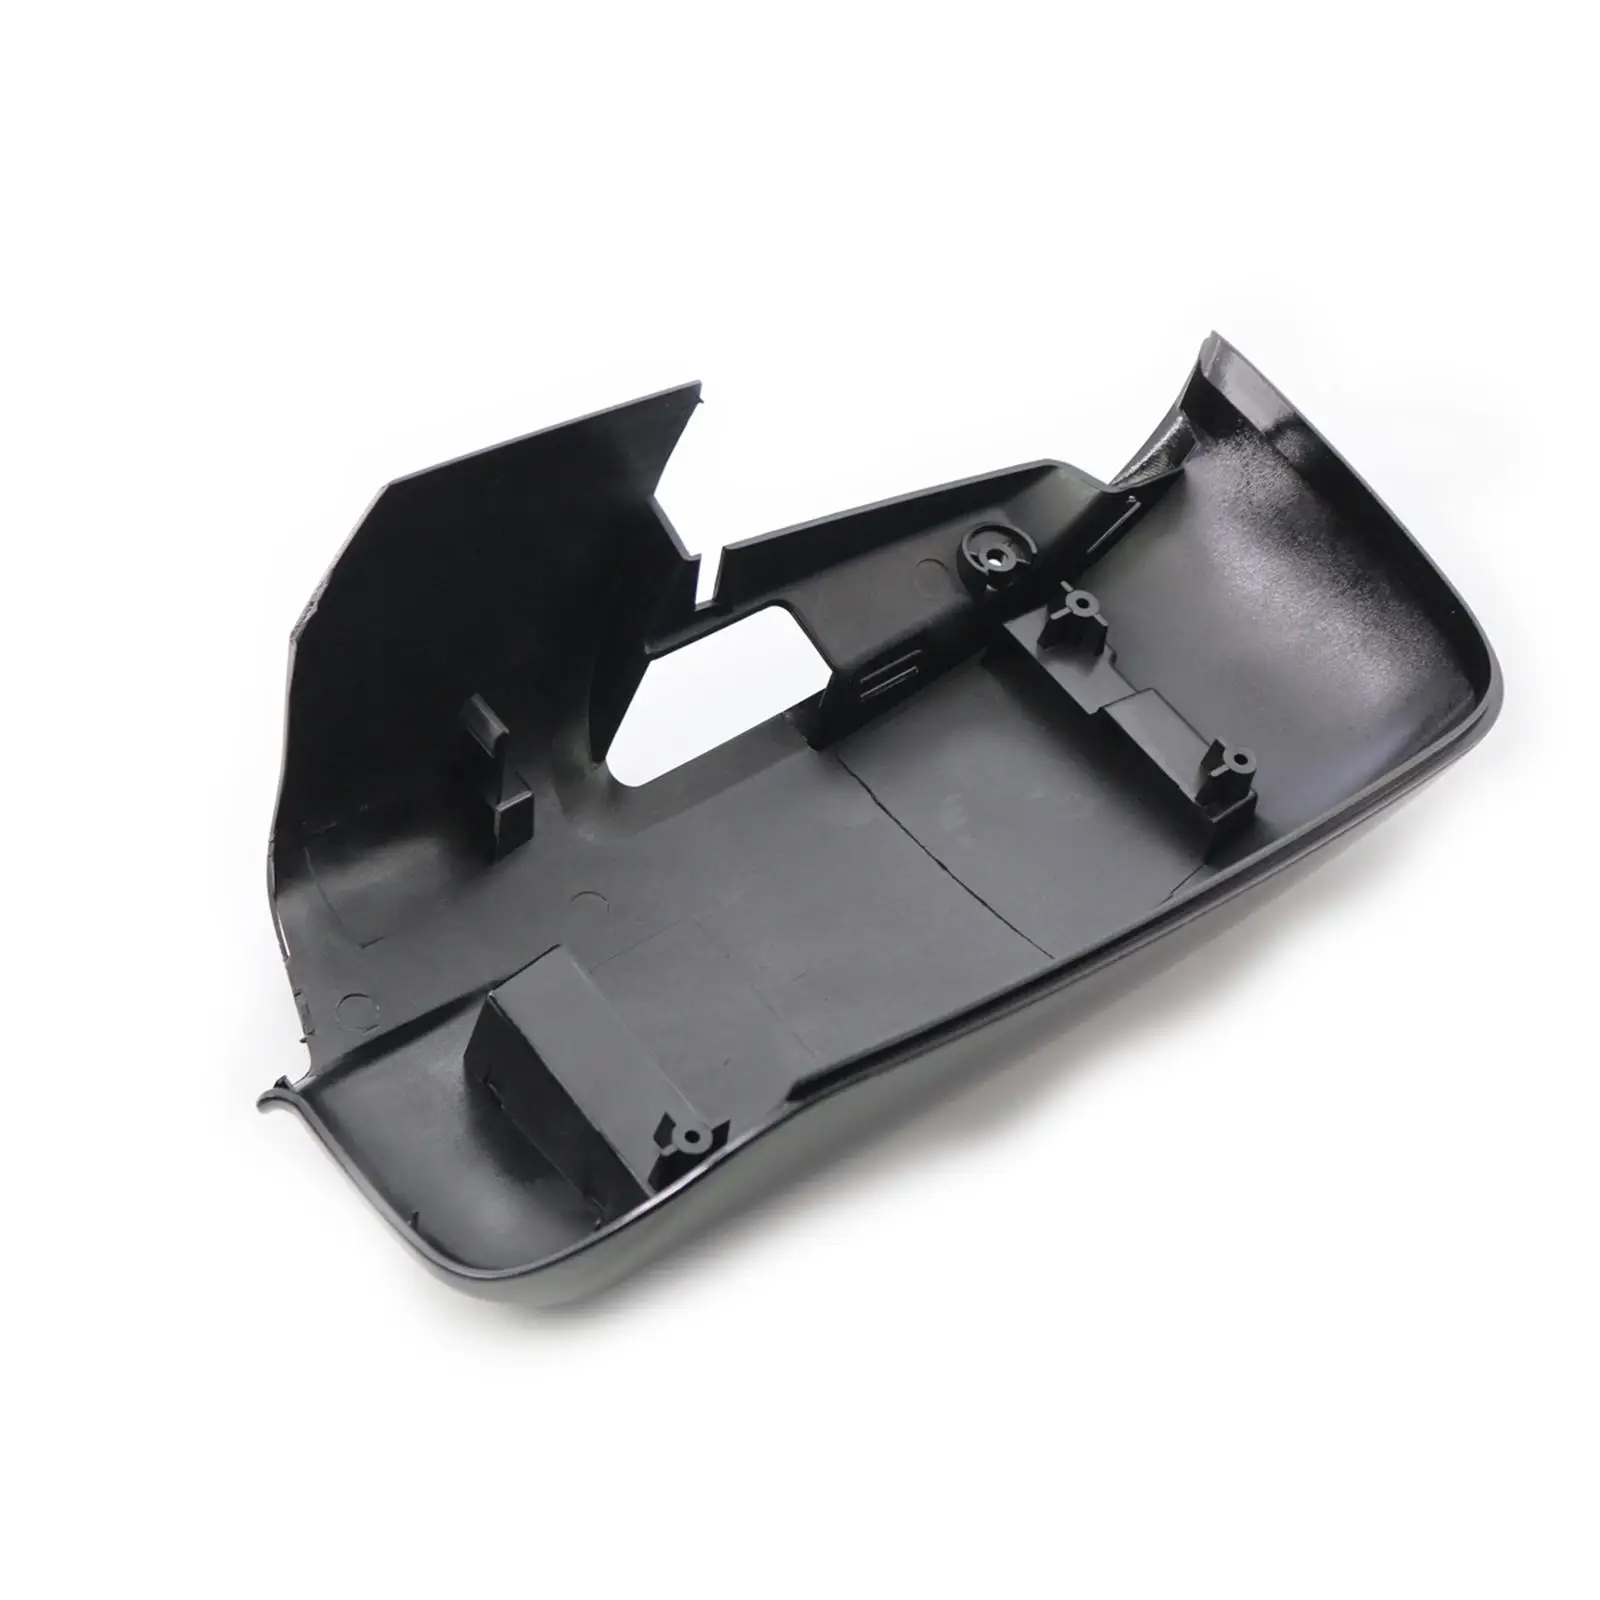 Left Reverse Mirror Cover Car Styling Driver Side Mirror Housing Assembly Replacement Fit for RAM 1500 2013-2018 Vehicle Parts